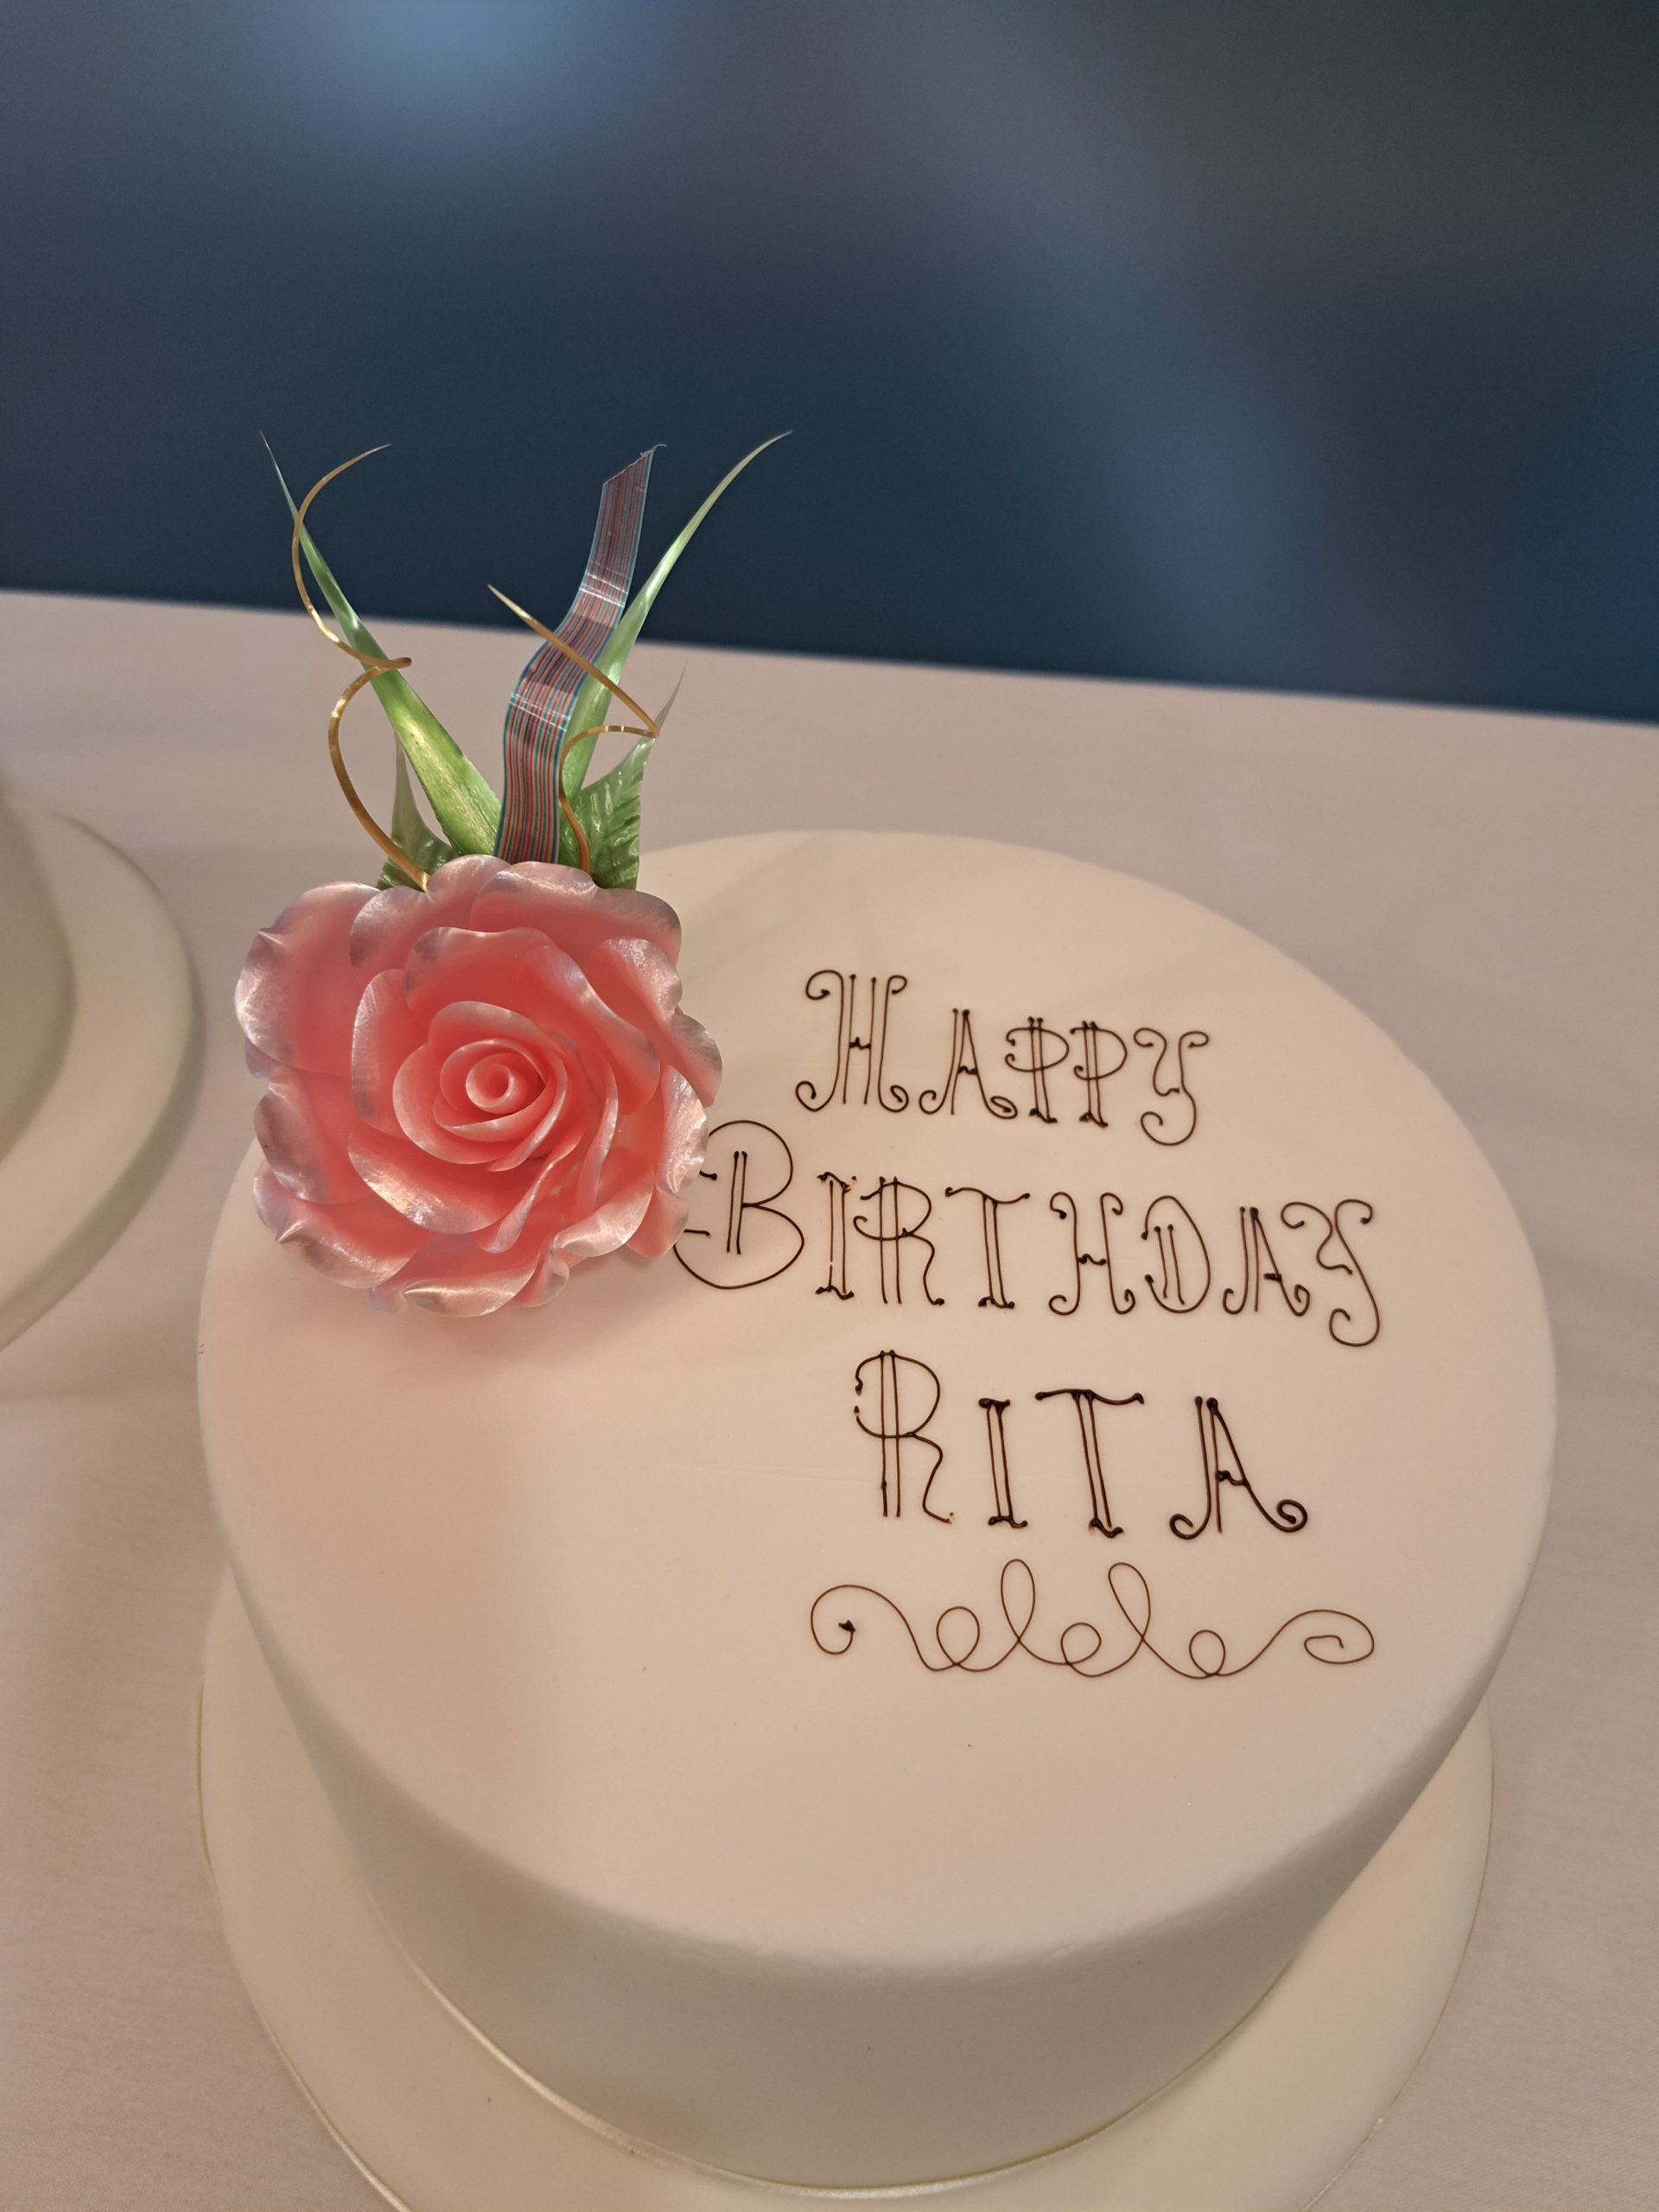 Happy birthday to Rita at Hengist Field Care Home - Residential & Dementia  Care Sittingbourne Kent